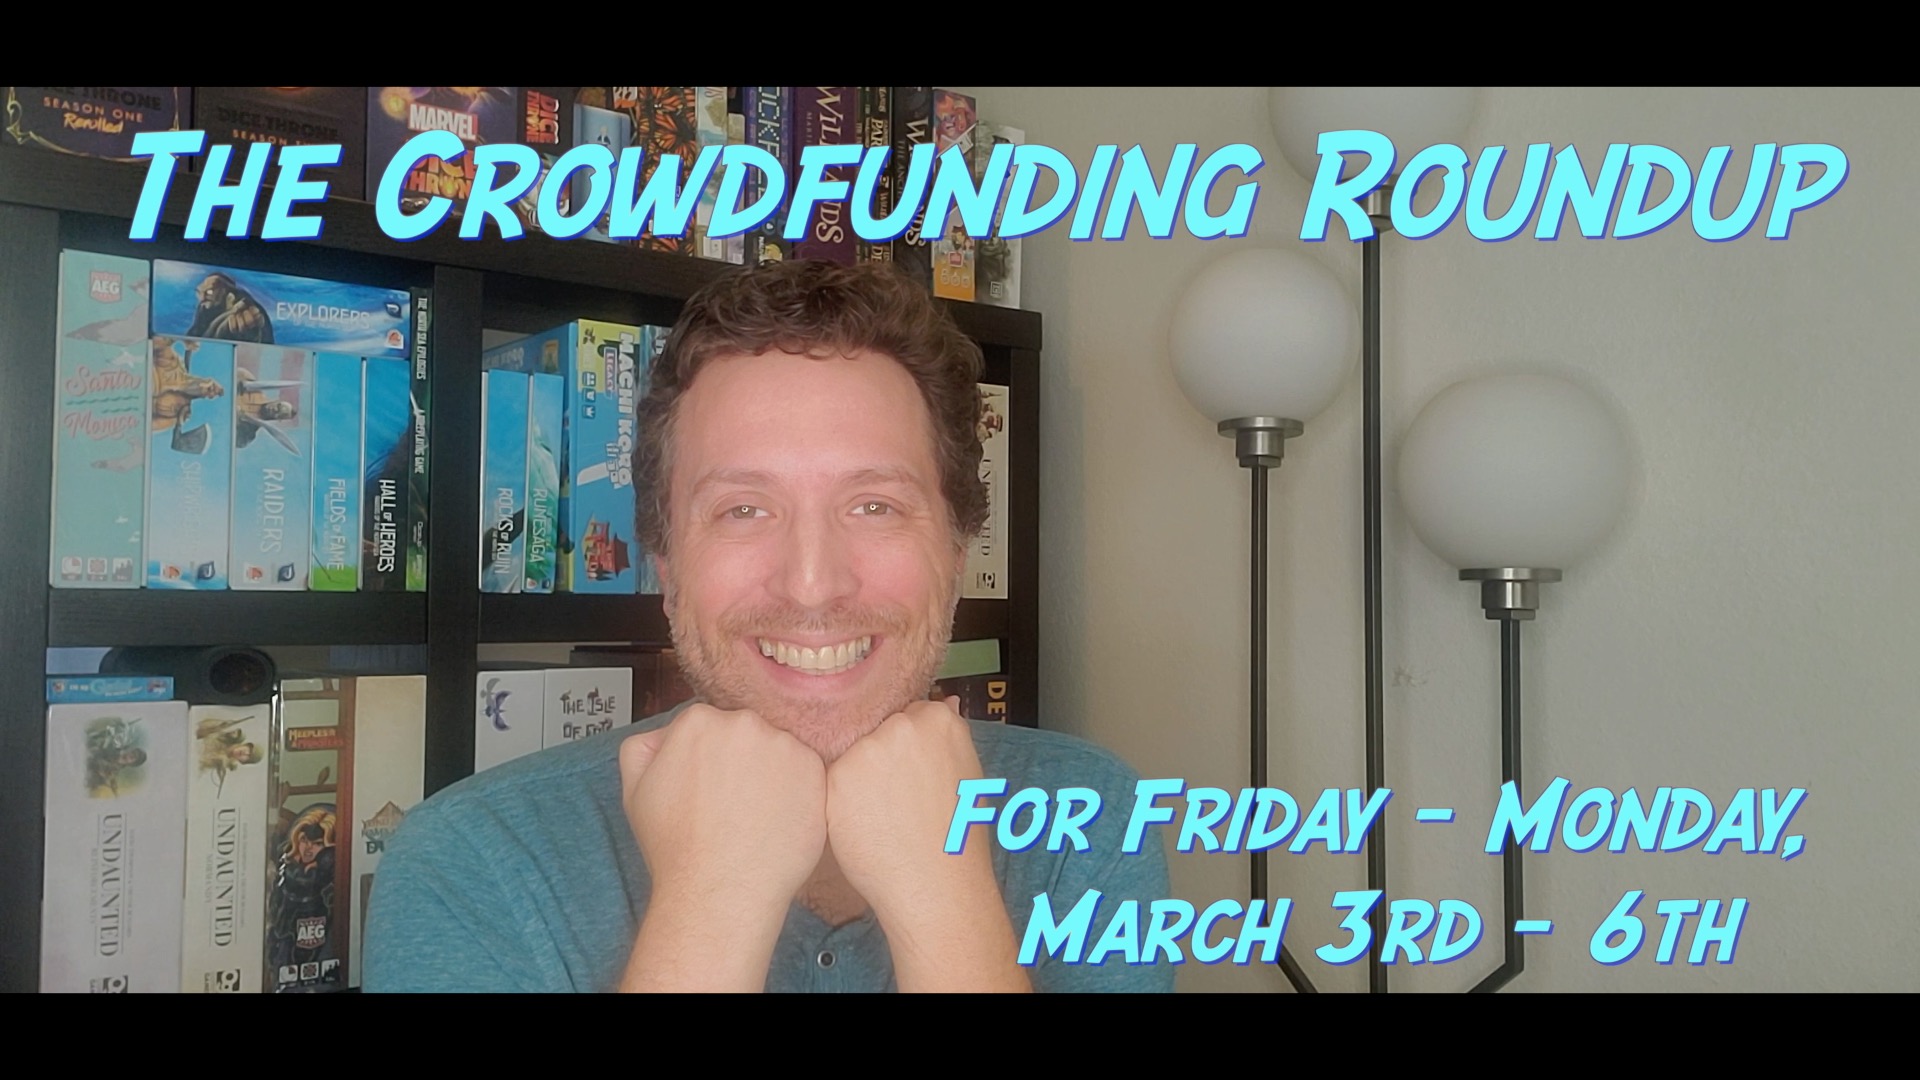 The Crowdfunding Roundup for Friday – Monday, March 3rd – 6th